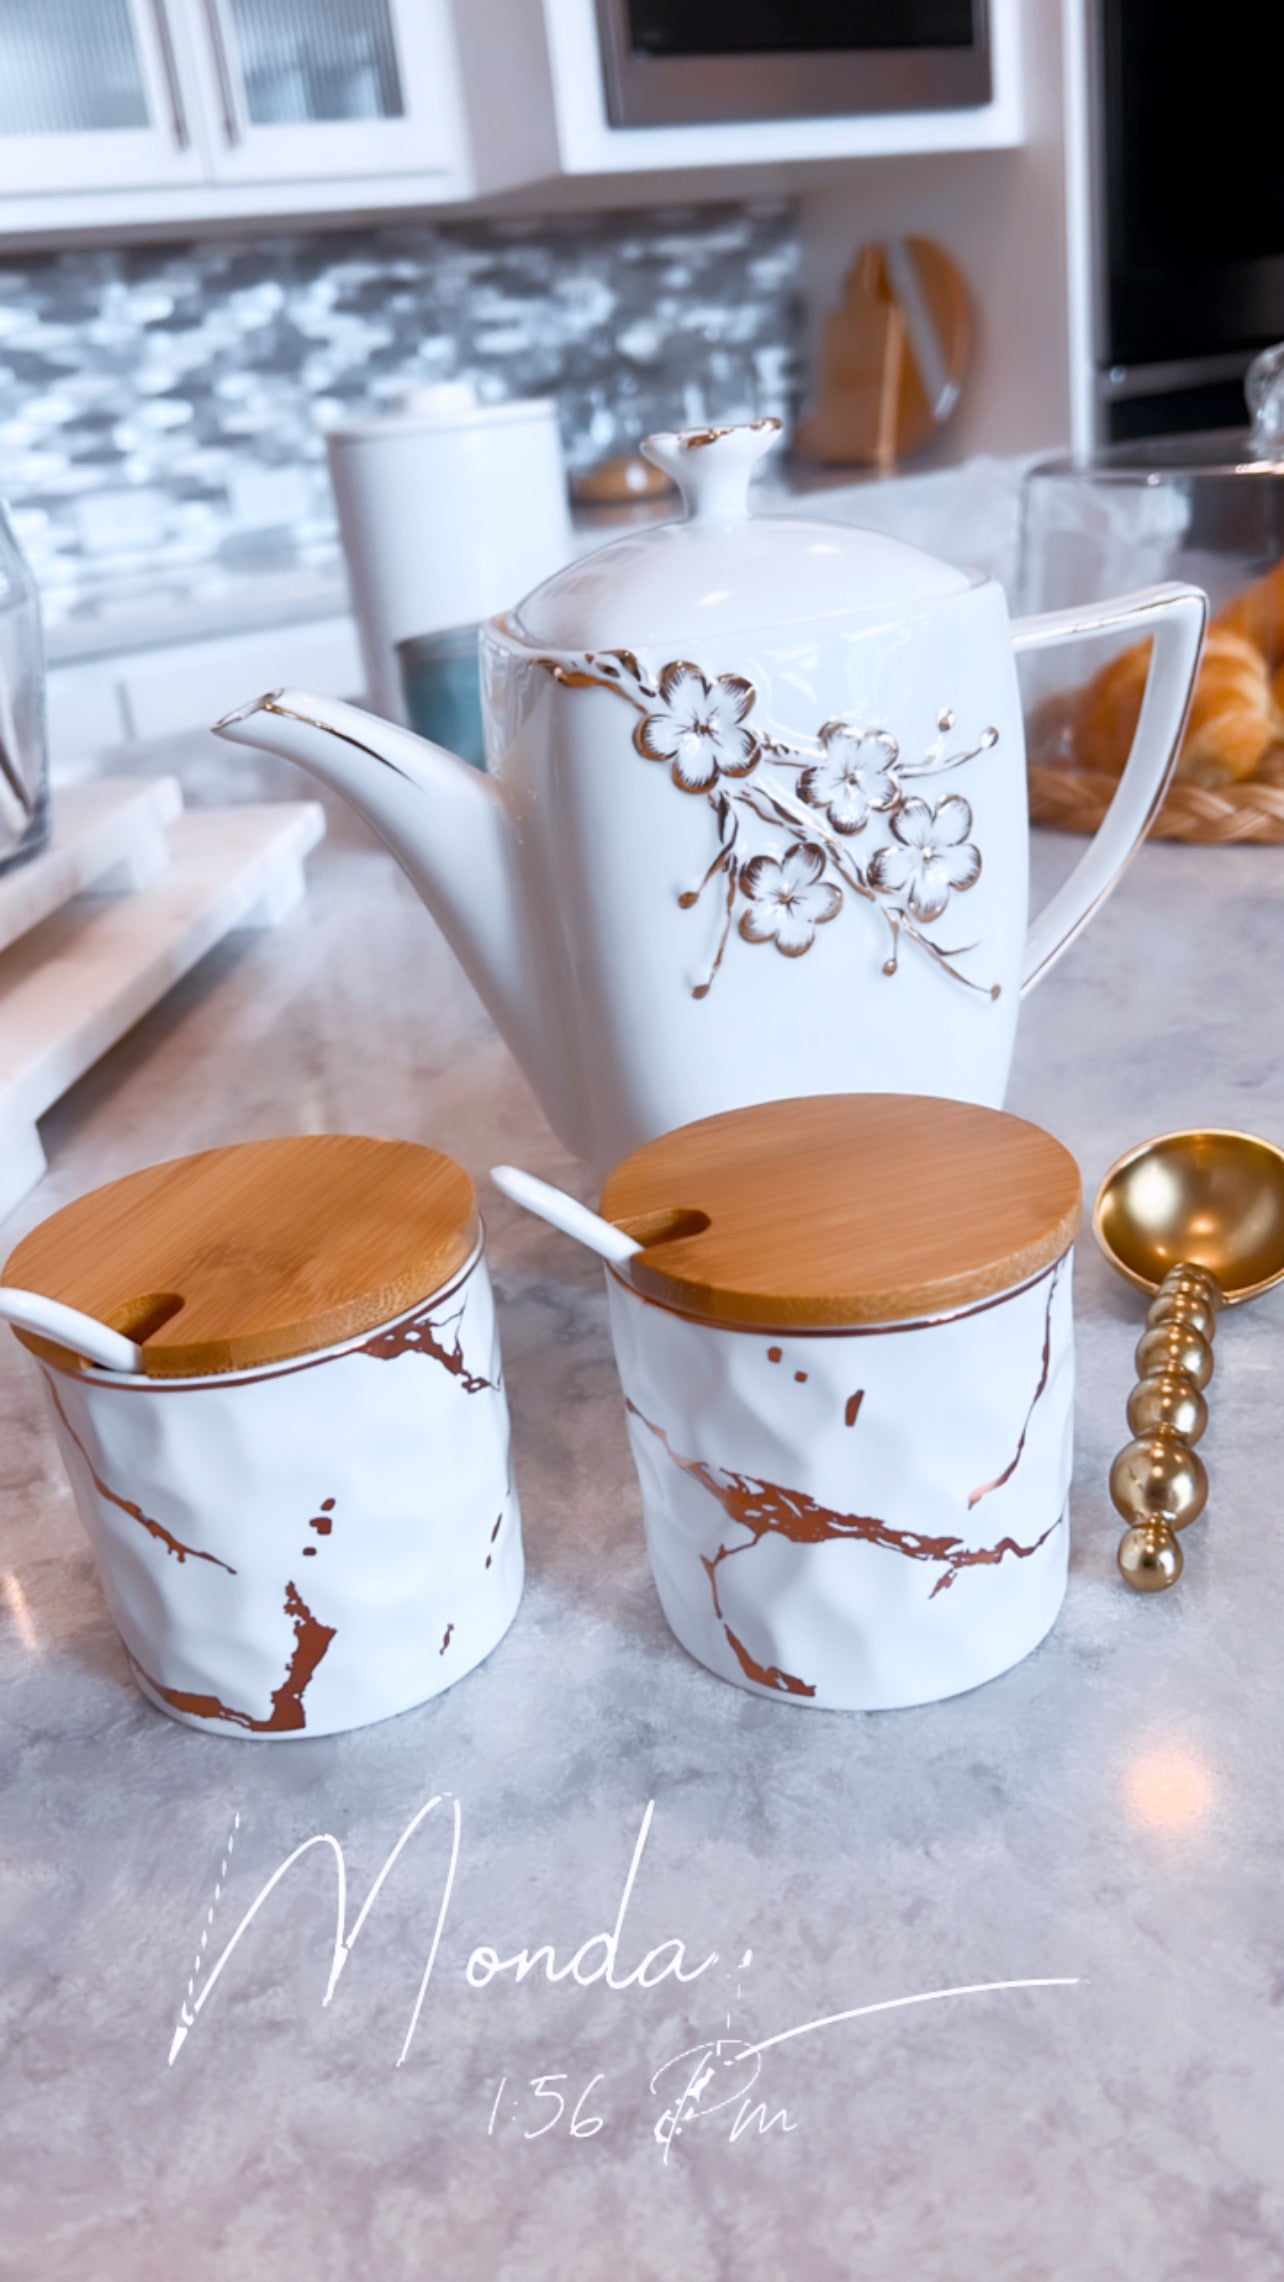 Metallic Gold Marble Print Spice Jars with Spoons and Wooden Lid With Tray (set of 3)